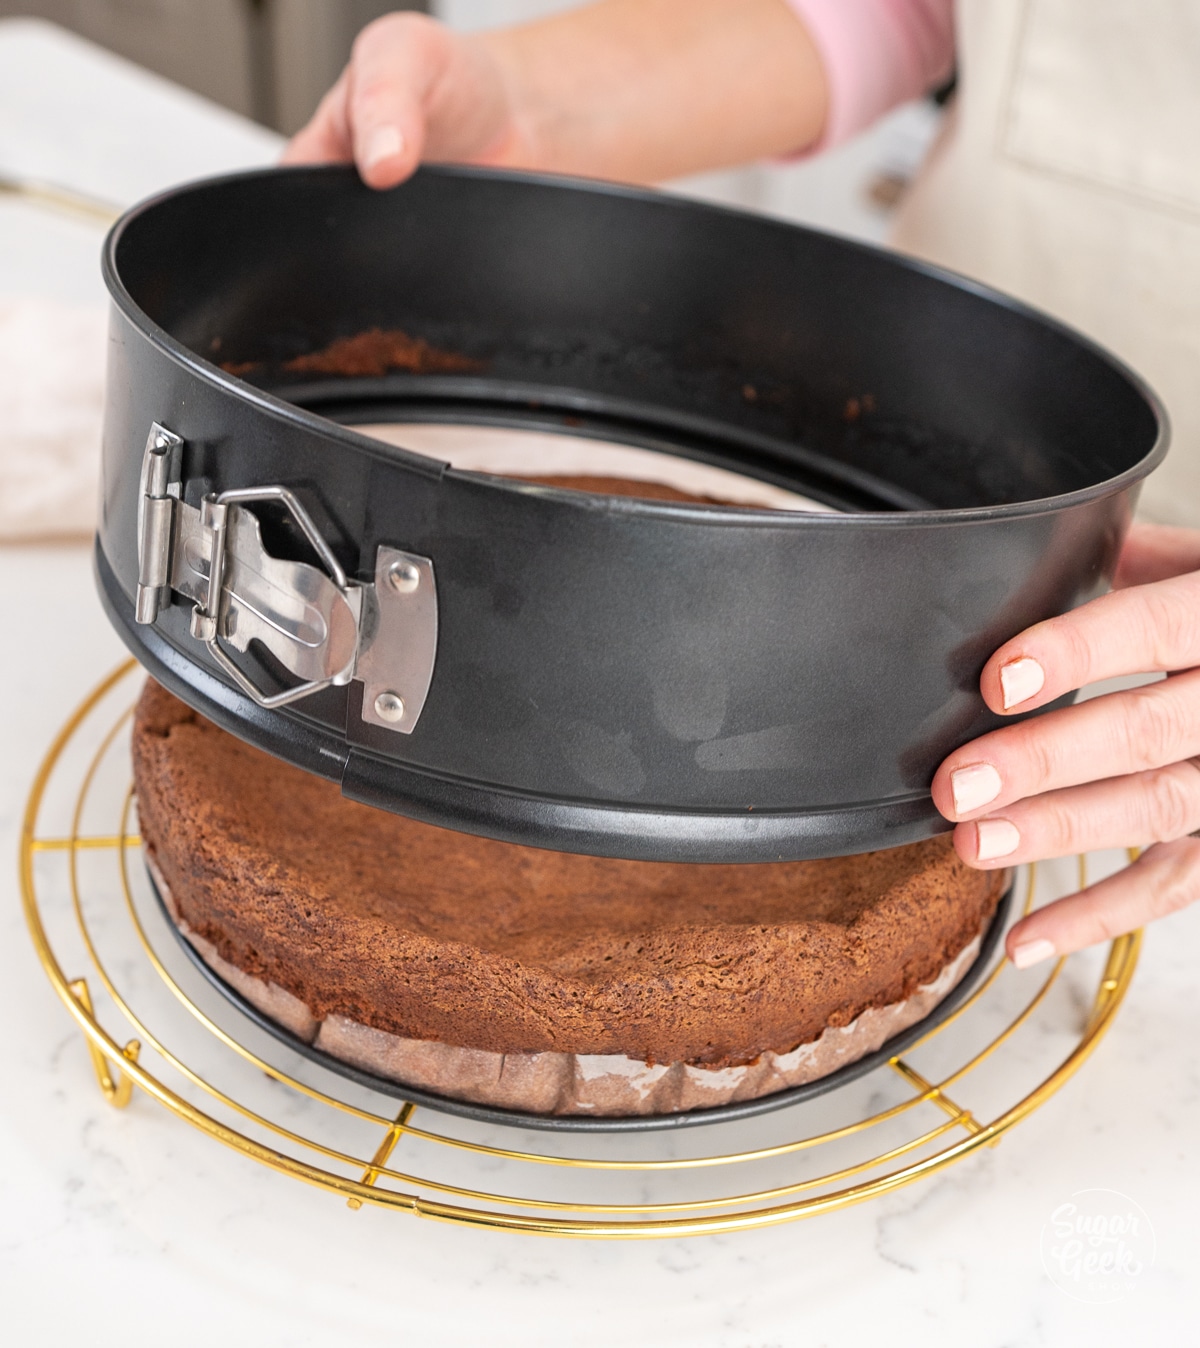 hands removing a springform pan from the outside of a flourless chocolate cake